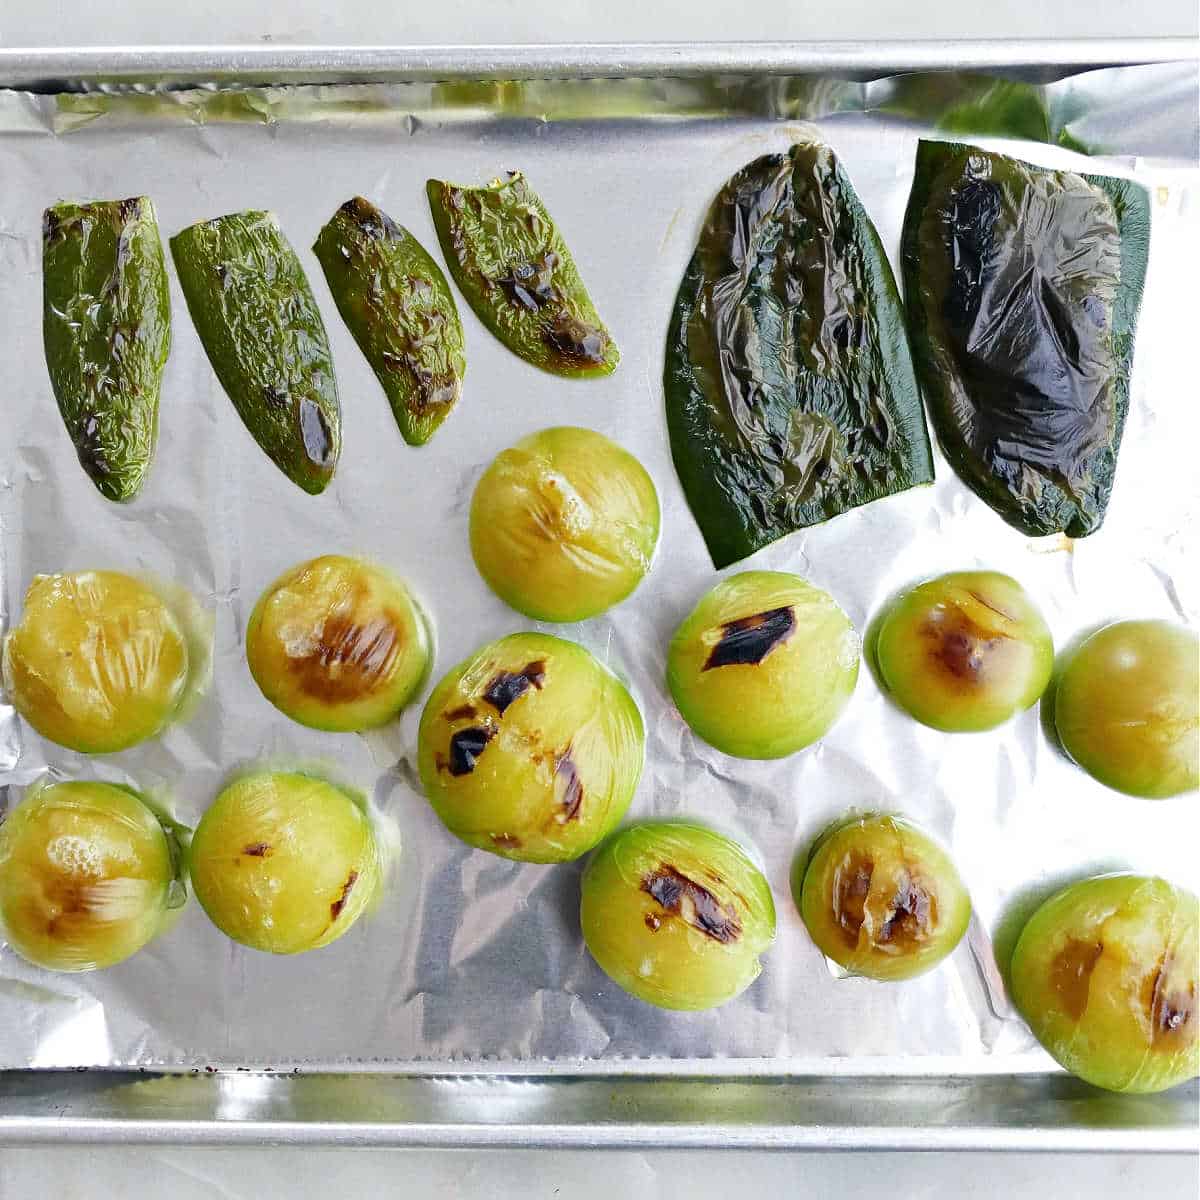 broiled tomatillos, jalapeños, and poblano peppers on a lined baking dish